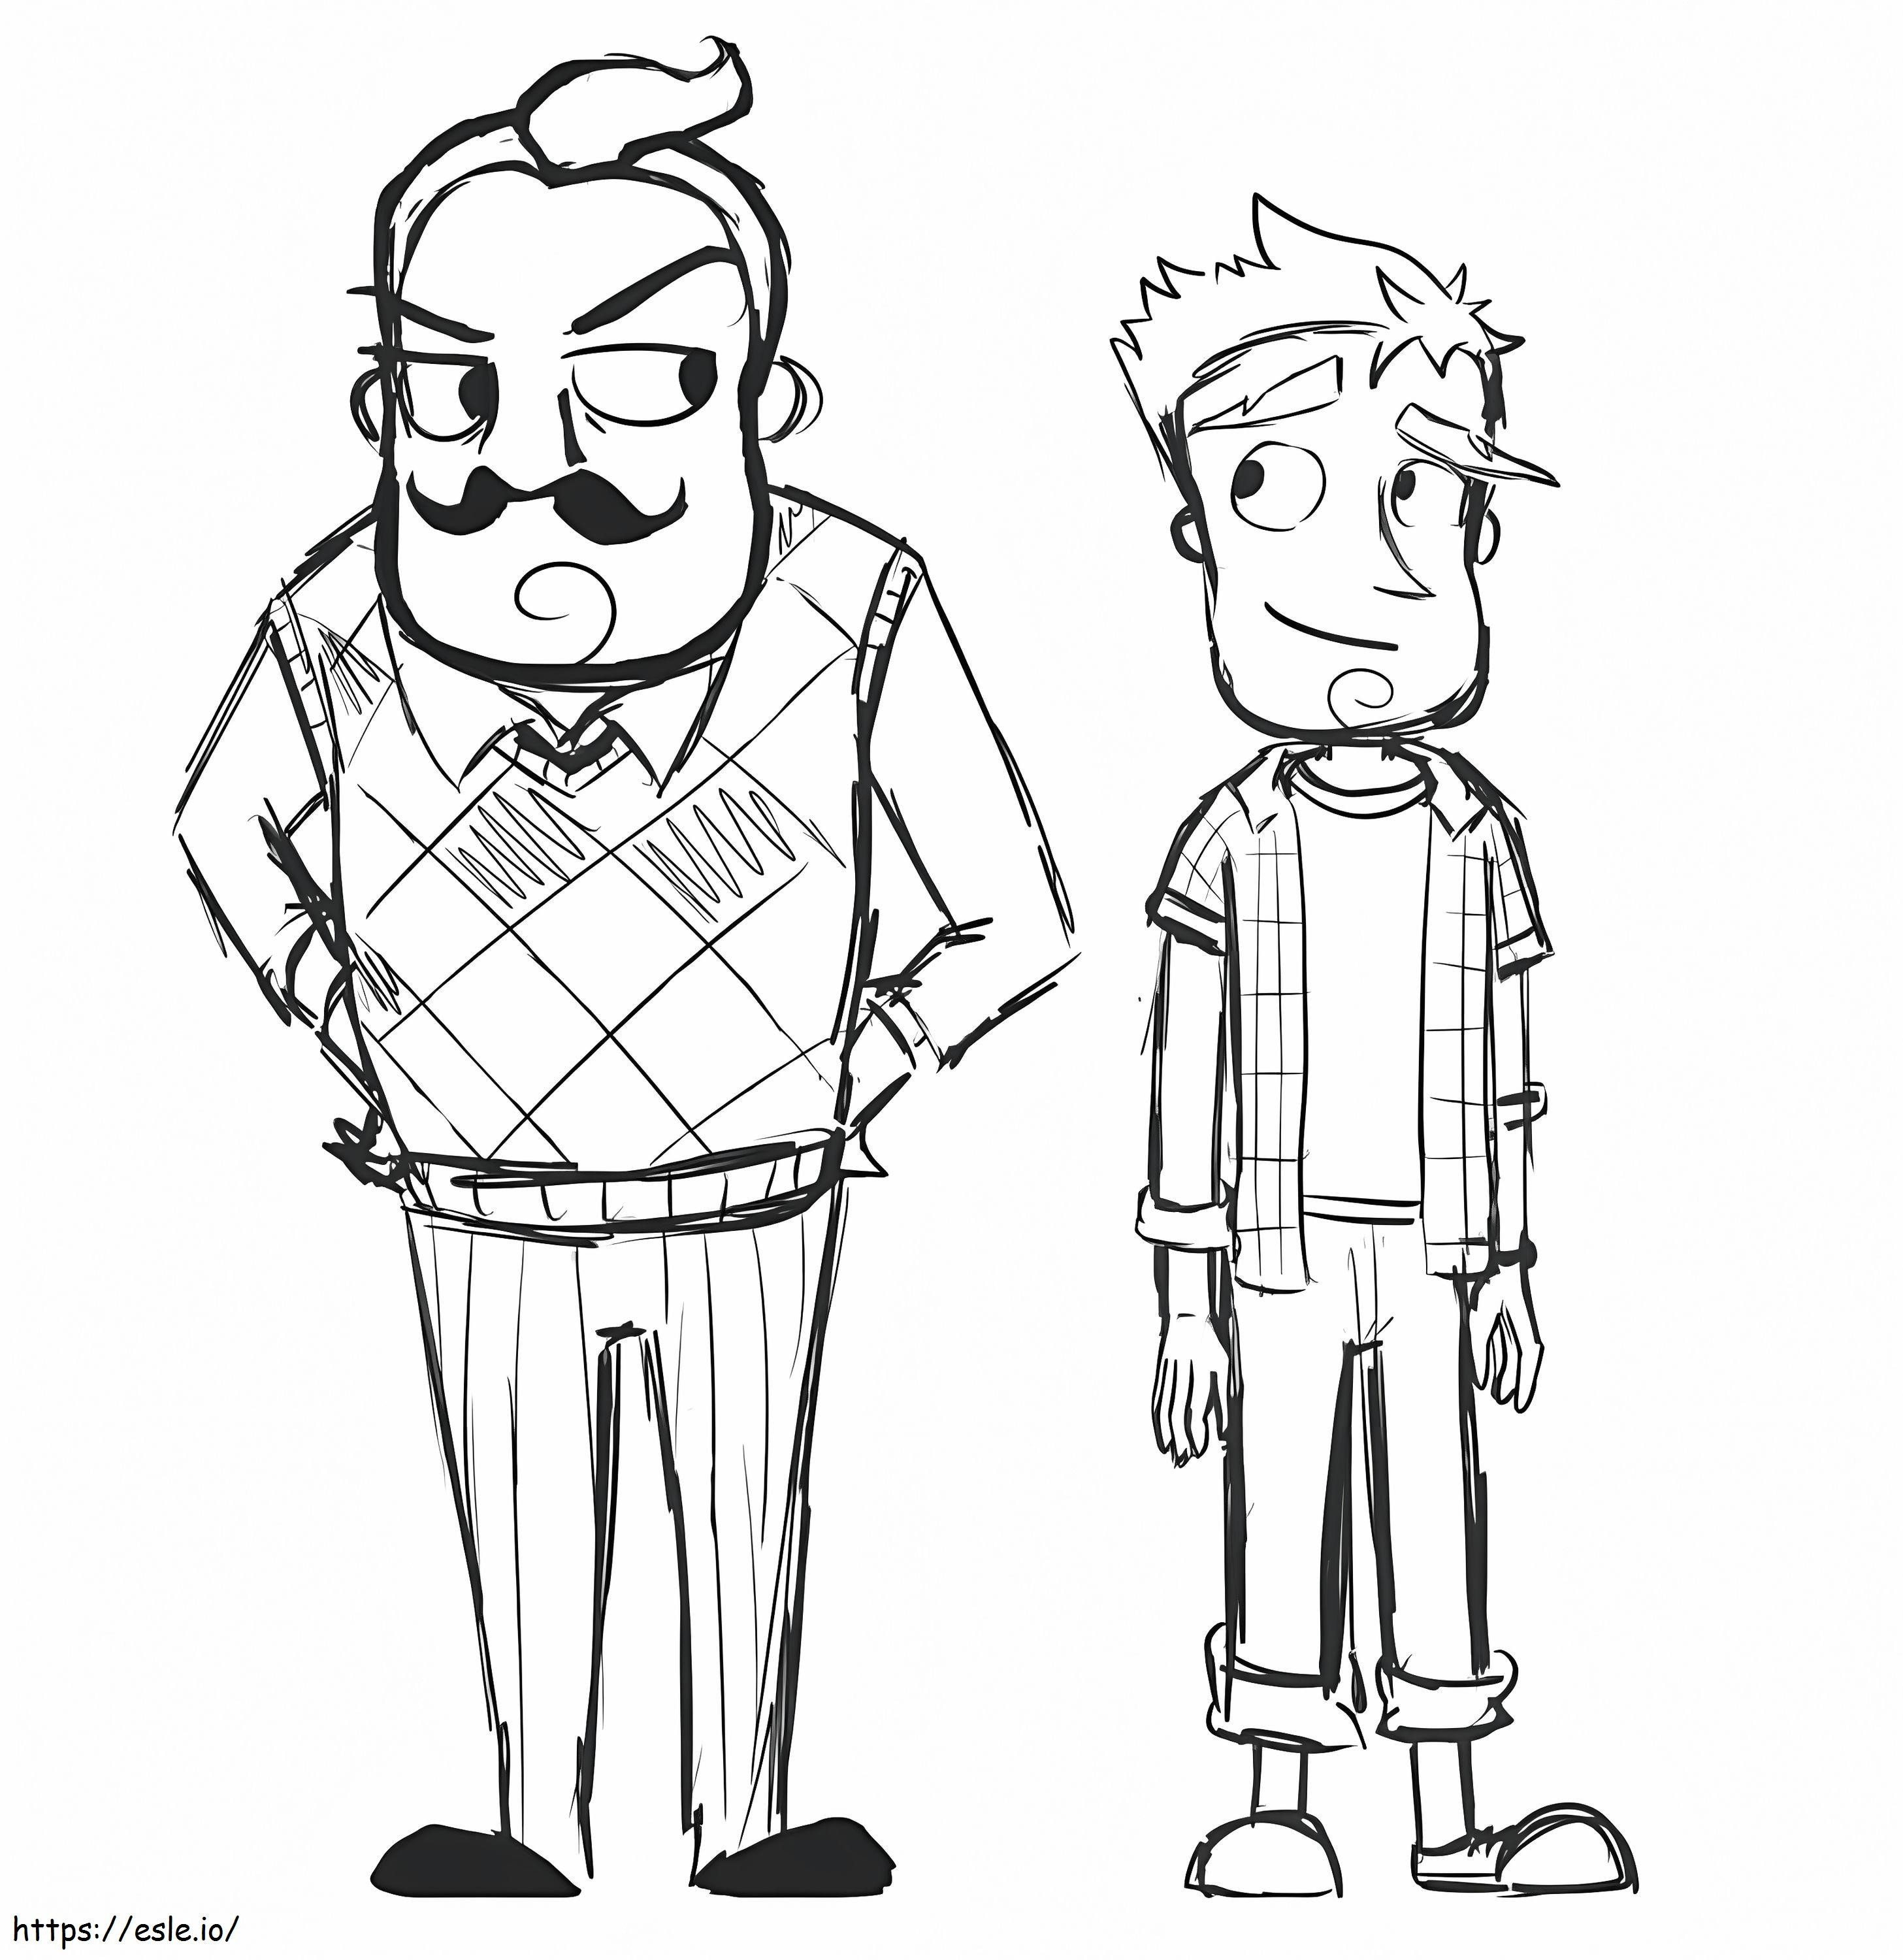 Hello Neighbor 9 coloring page